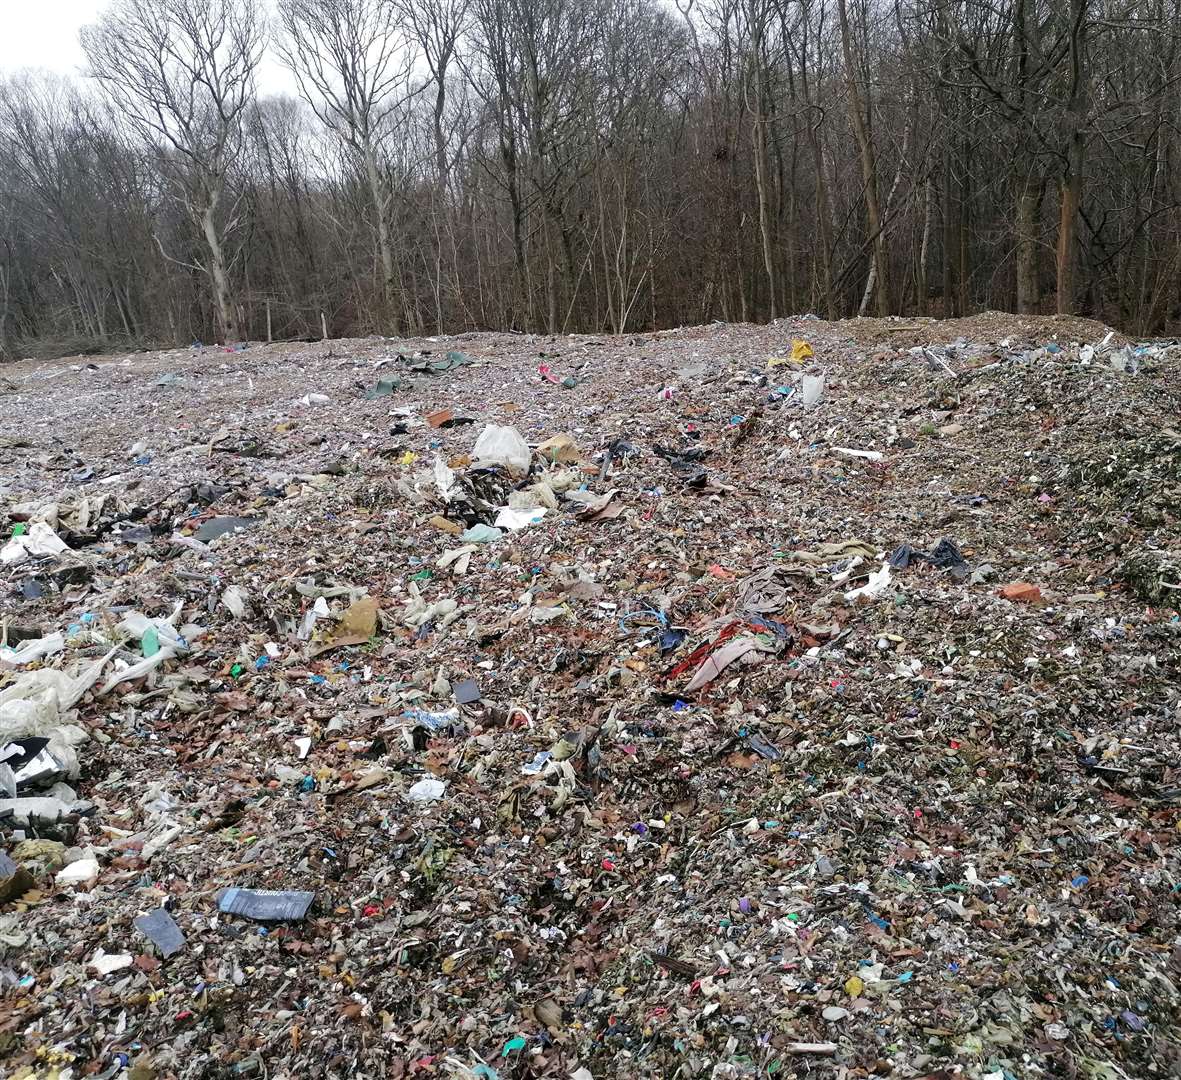 A court order is now in place prohibiting anyone from entering or depositing waste on the site